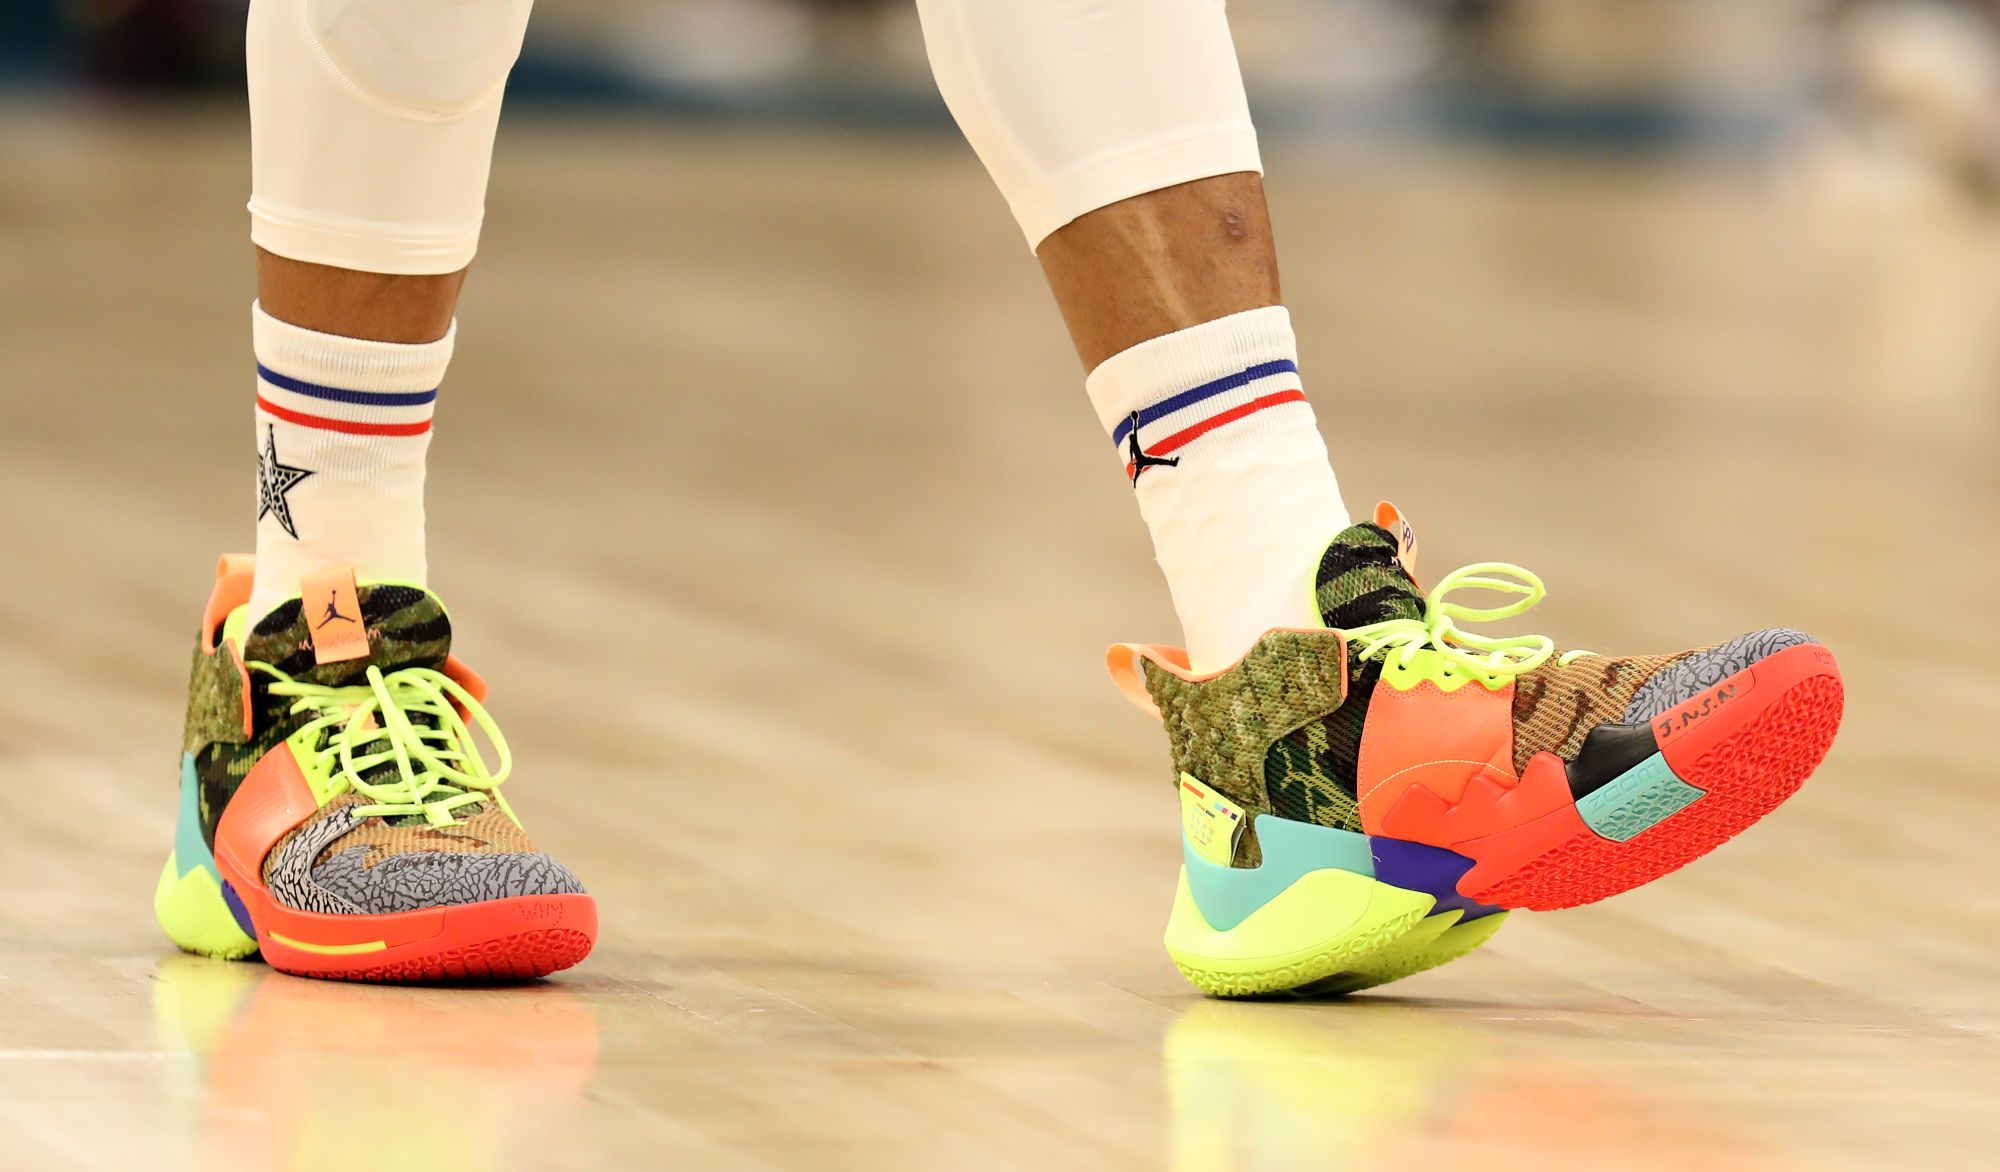 Why the NBA All-Star Game is a runway in its own right